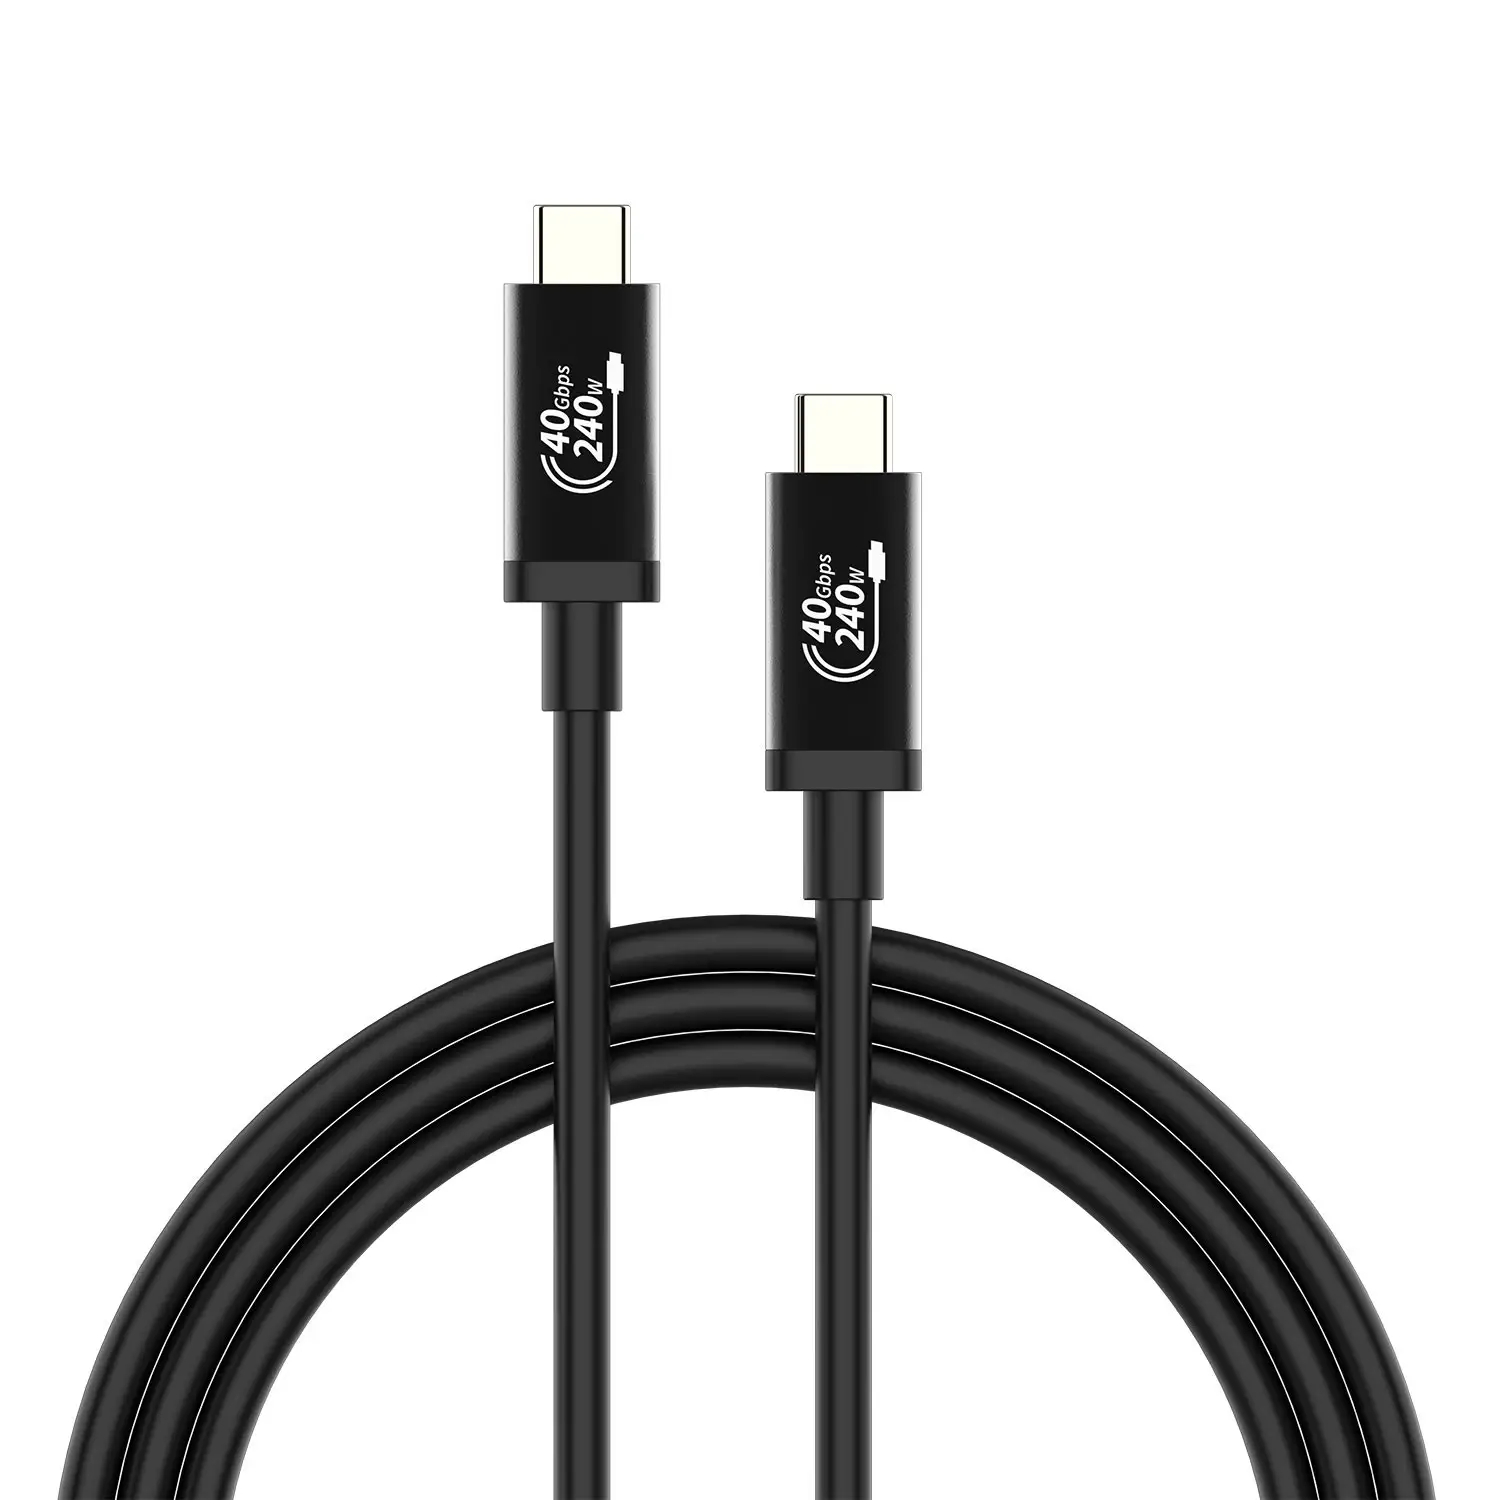 PD100W 240W Carregamento Rápido USB 4.0 Cabo USB C 40Gbps VR Link Cable para 0culus Quest 2 Realidade Virtual Headsets Gaming VR Cable